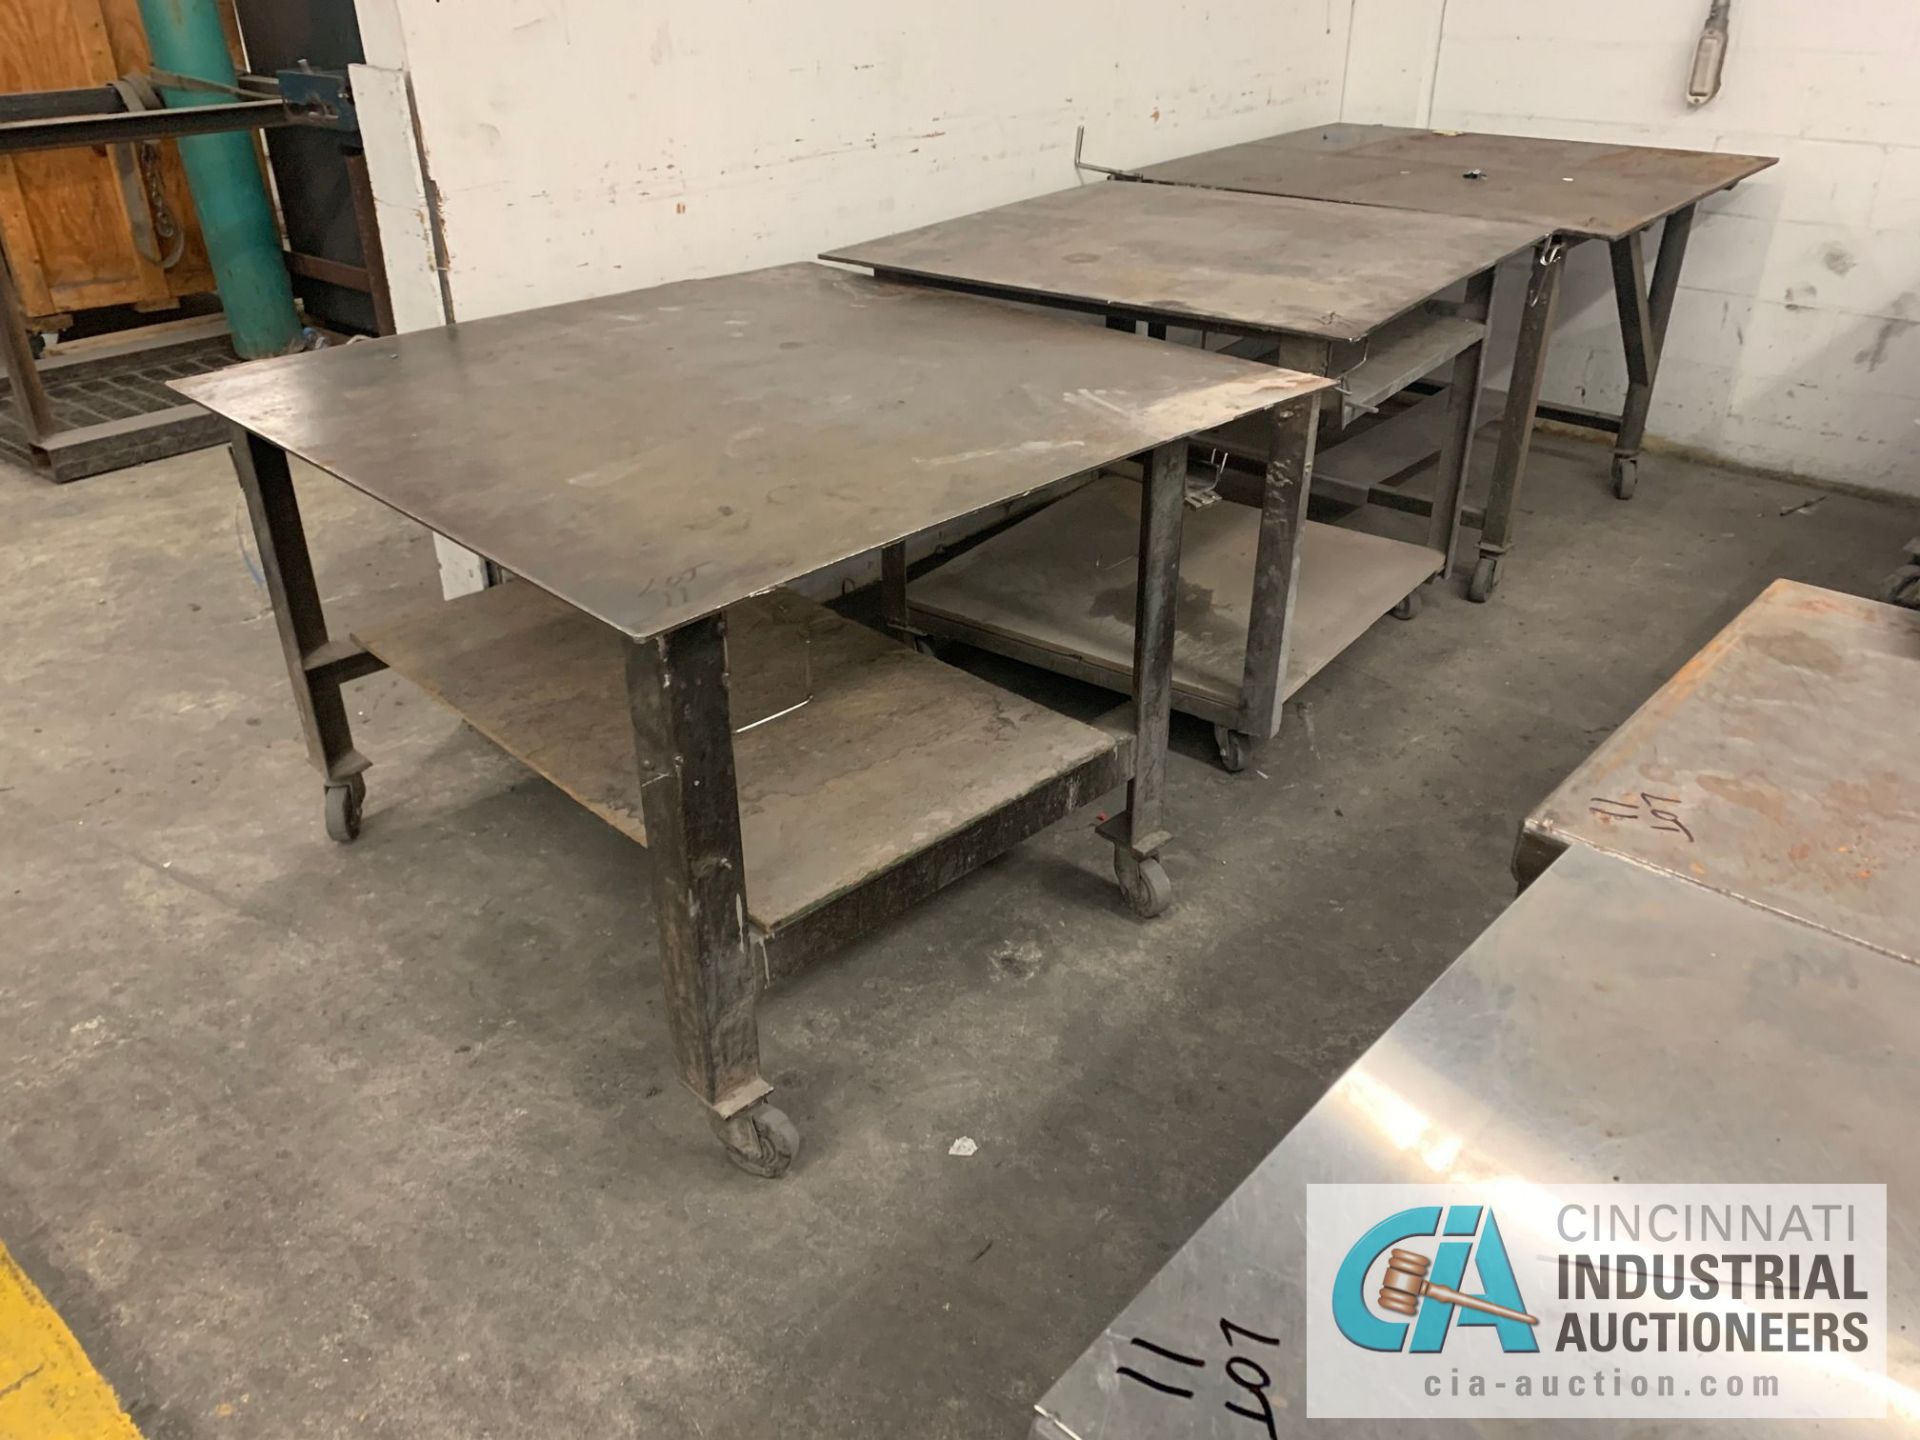 VARIOUS HEAVY DUTY CARTS, SOME SET-UP TO BE HEAVY WELD TABLES - Image 2 of 5